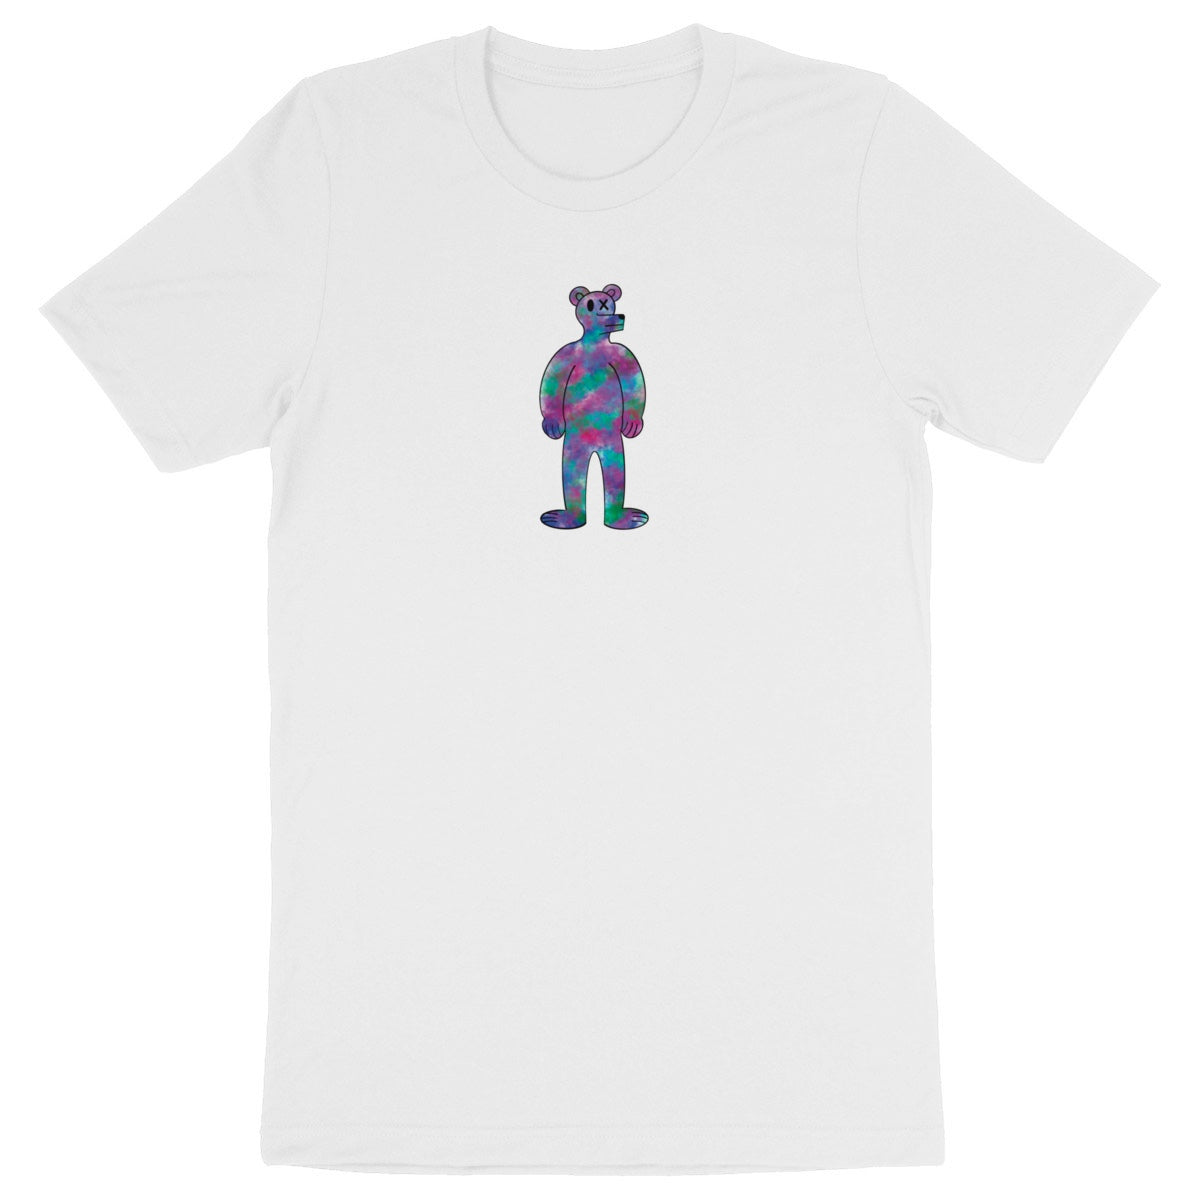 Water Color Bear Graphic Tee